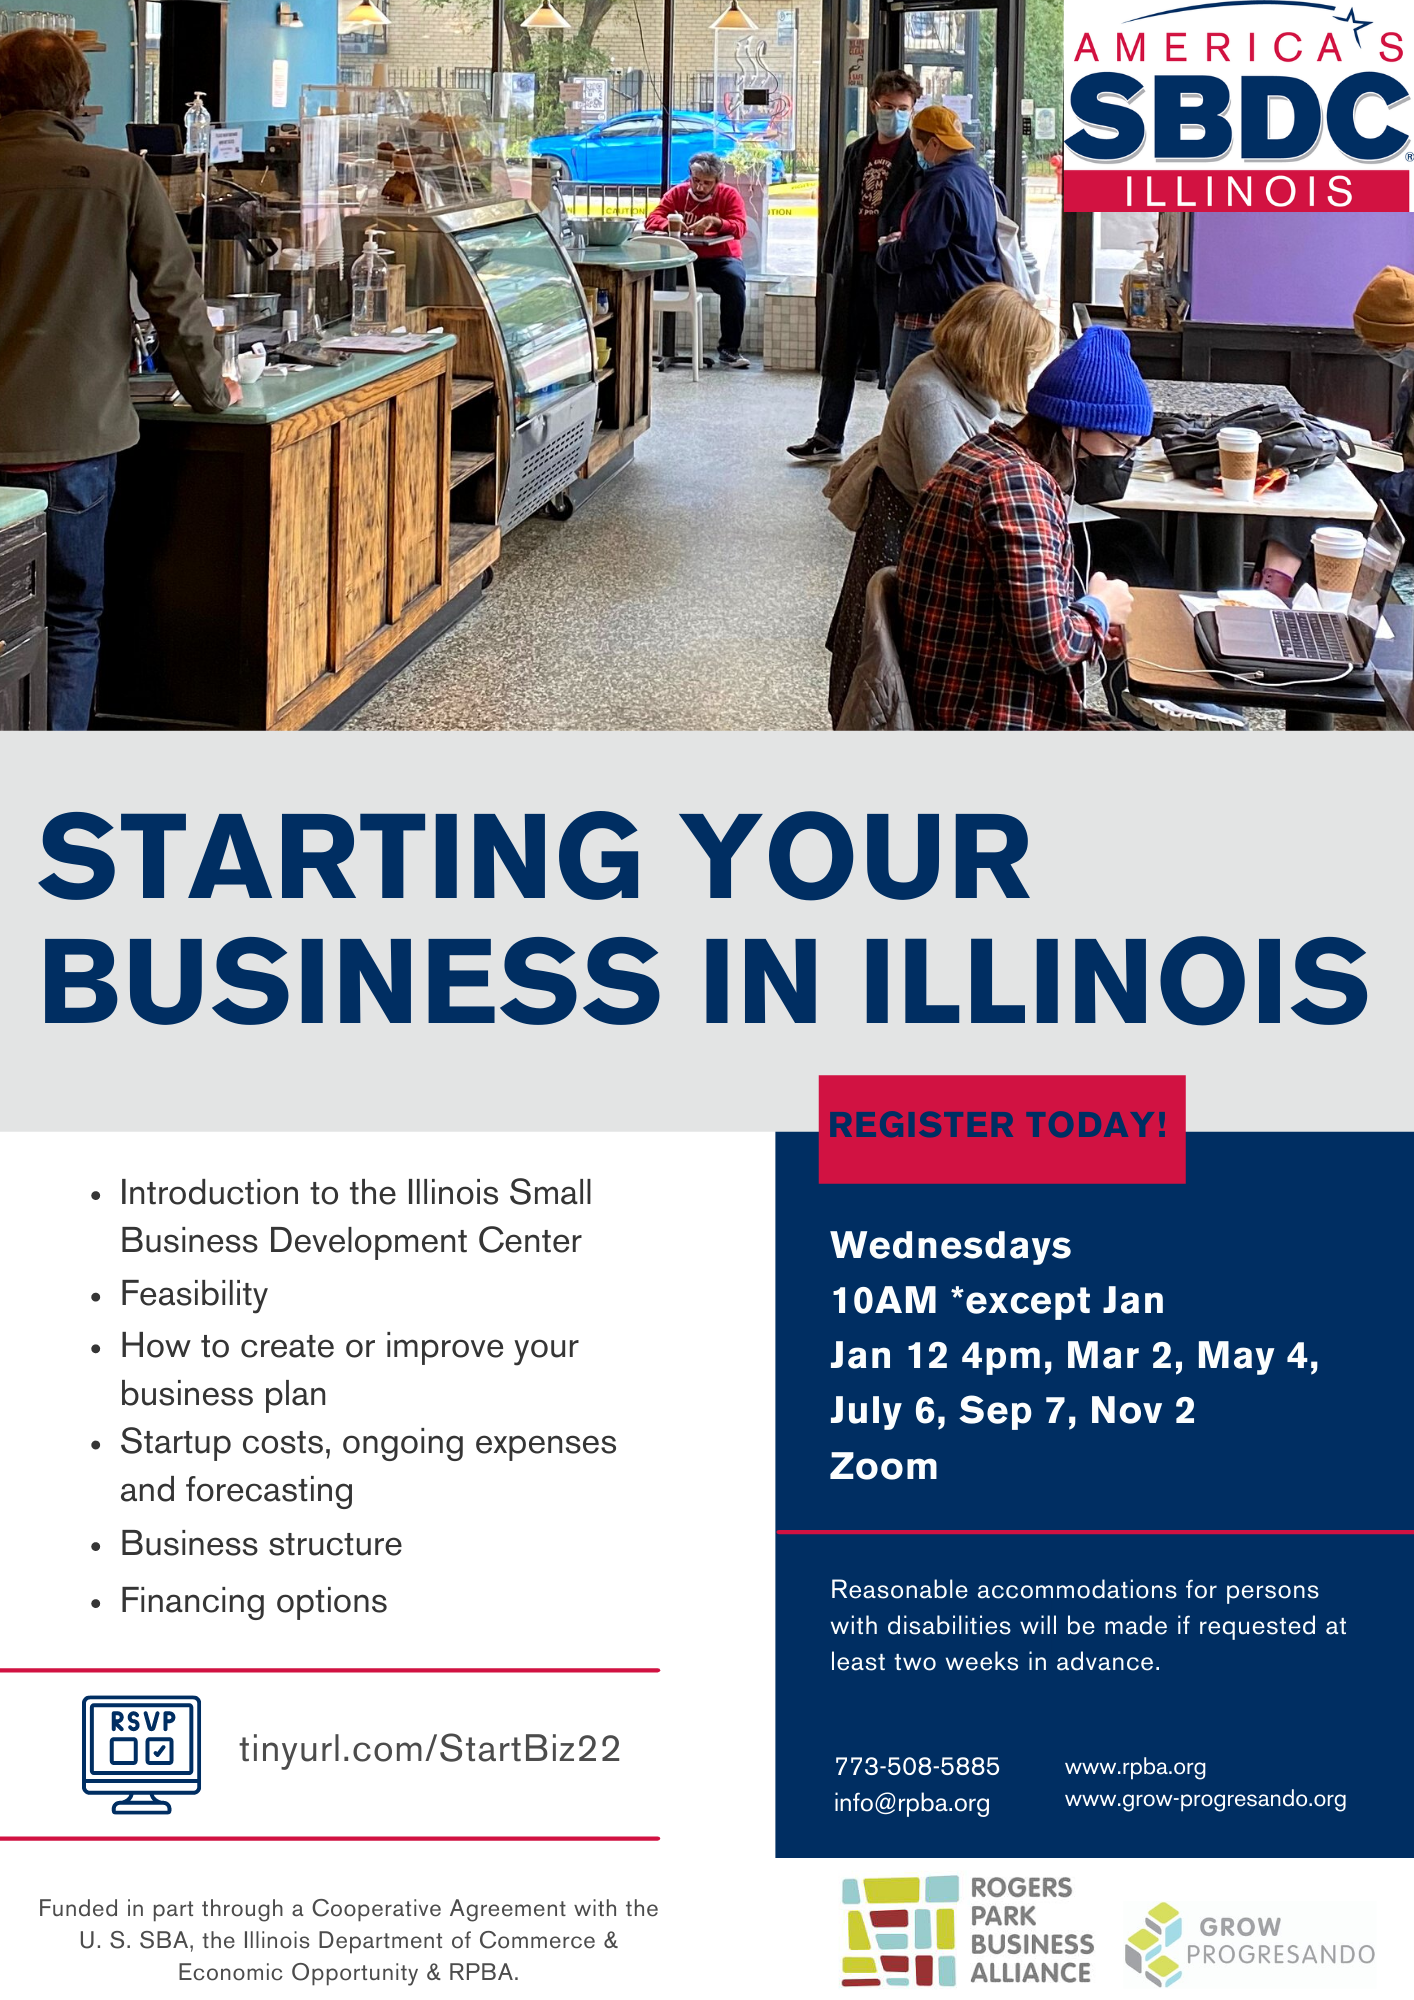 Starting Your Business in Illinois &#8211; 2022, rogers-park-business-alliance